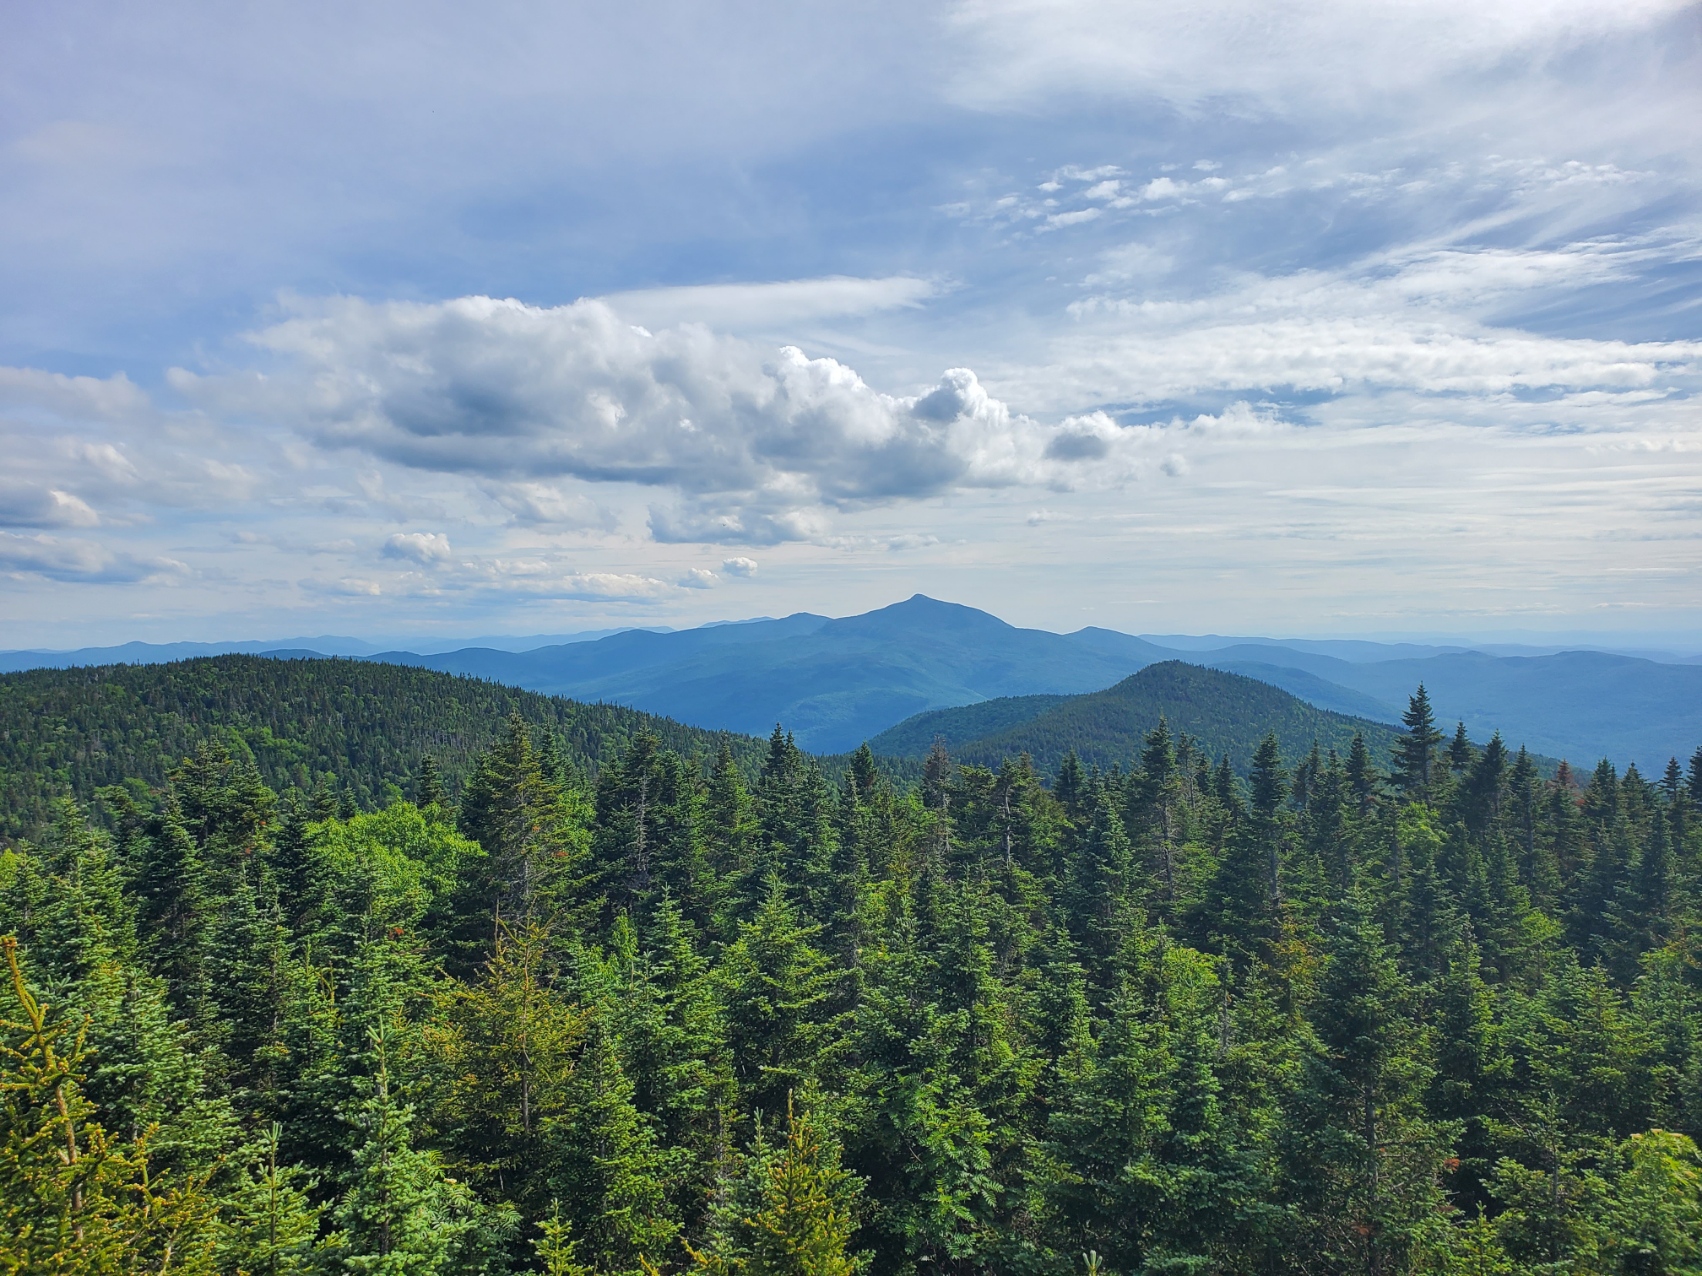 A photo of the Adirondacks from the top of a fire tower.